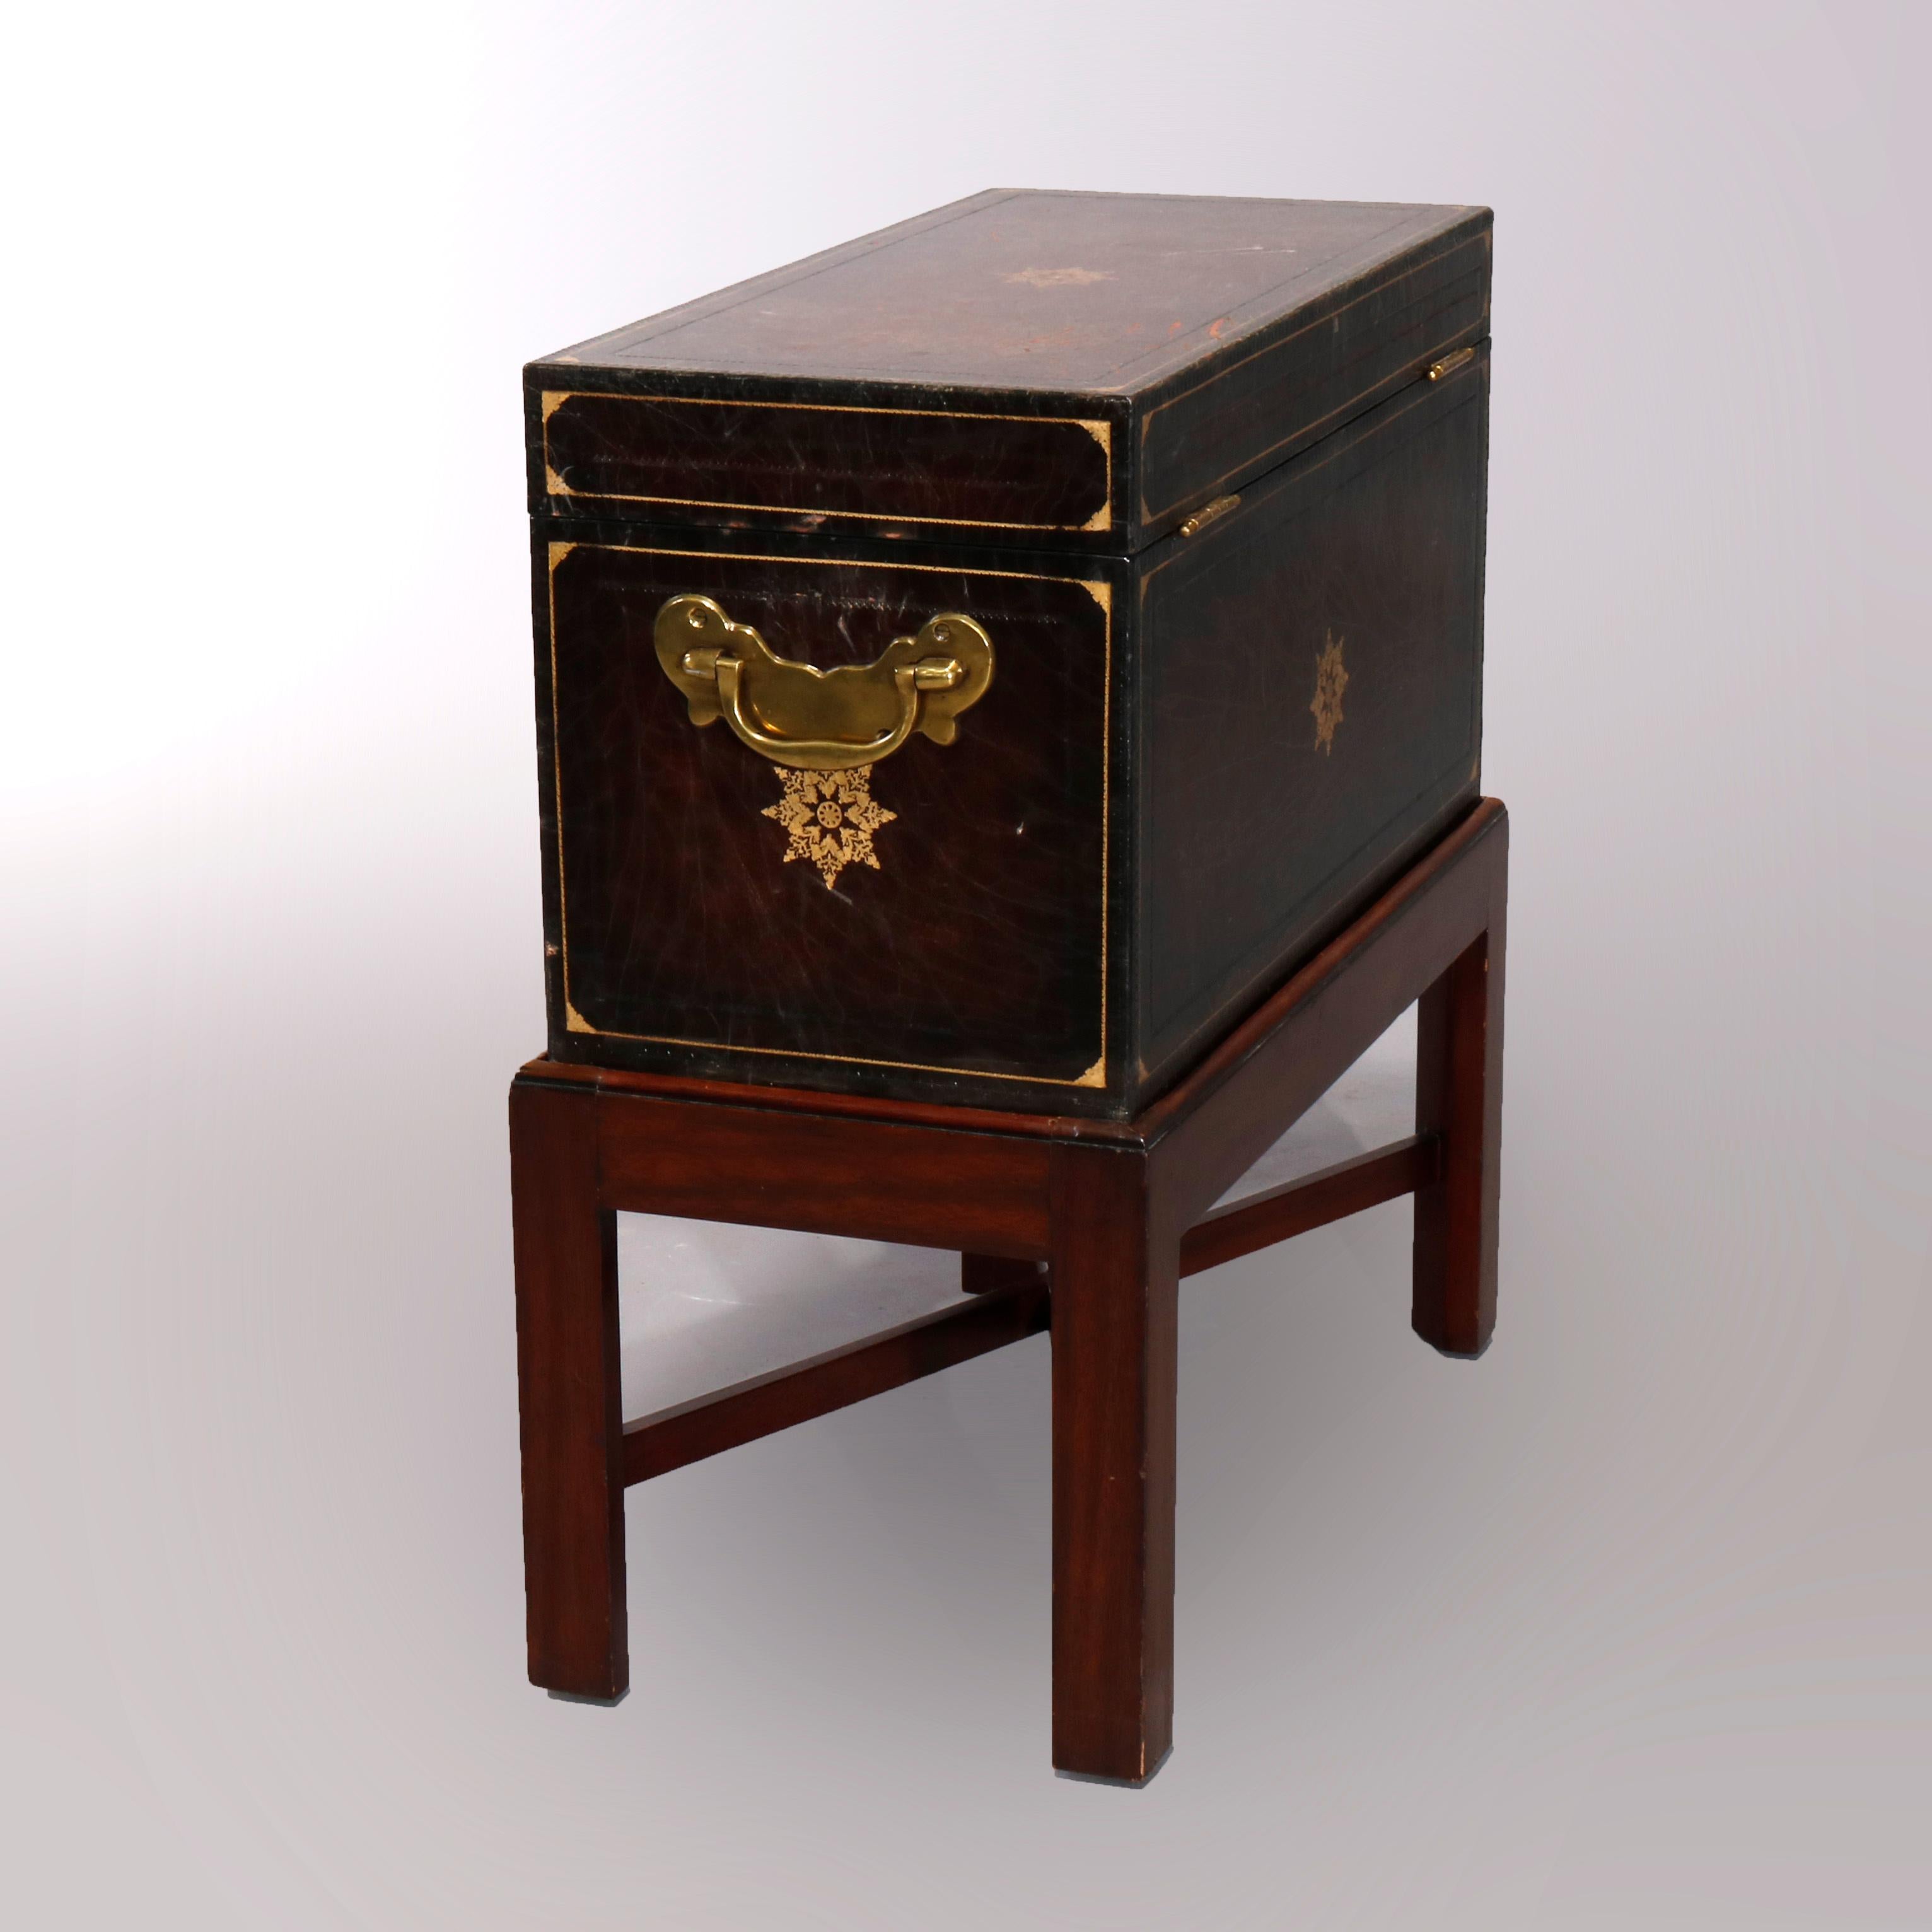 European Continental Leather Dowry or Document Box on Mahogany Stand, 20th Century